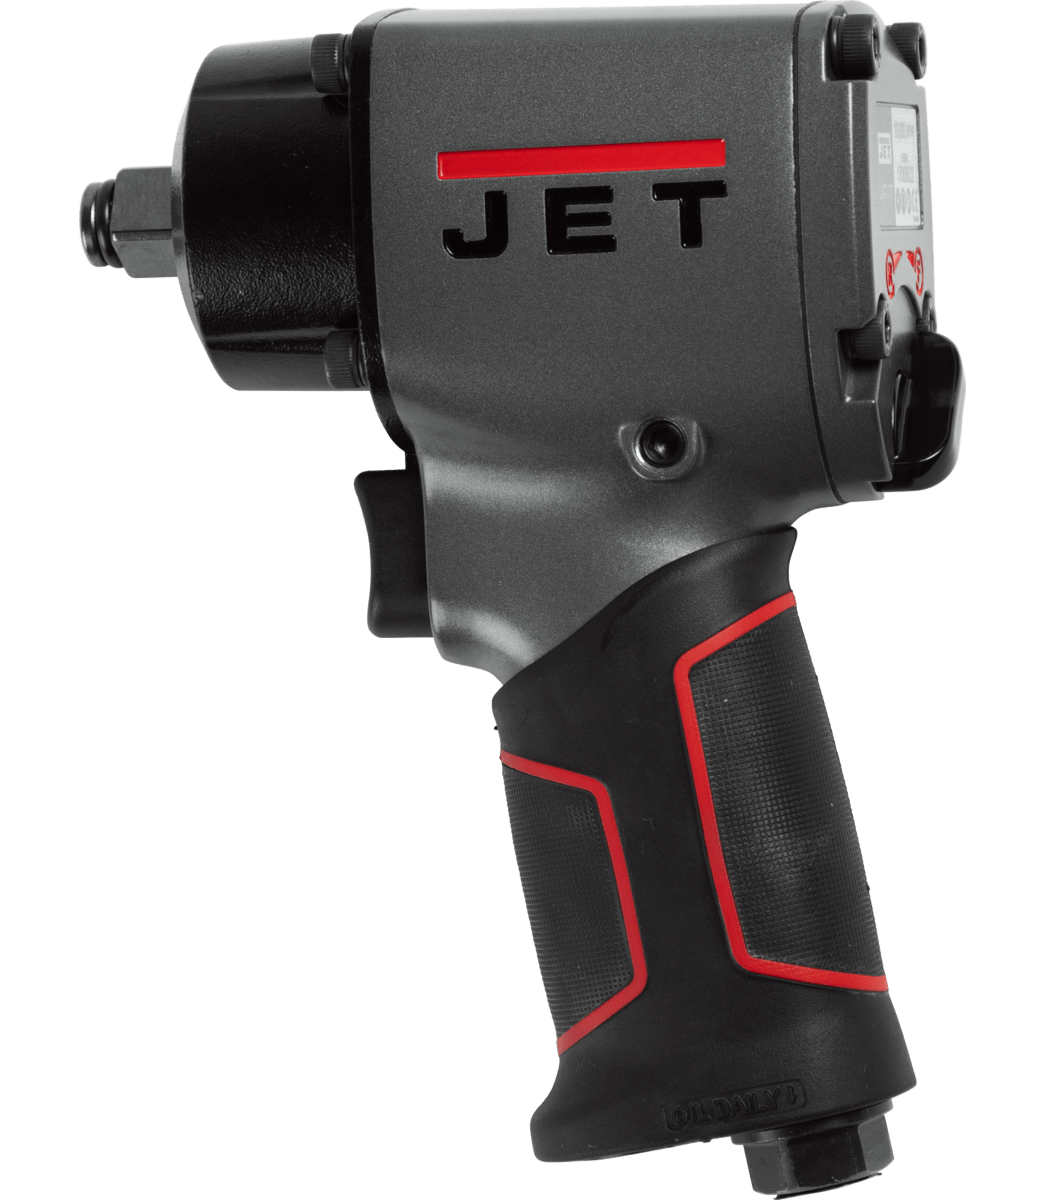 2" Compact Impact Wrench - Jet